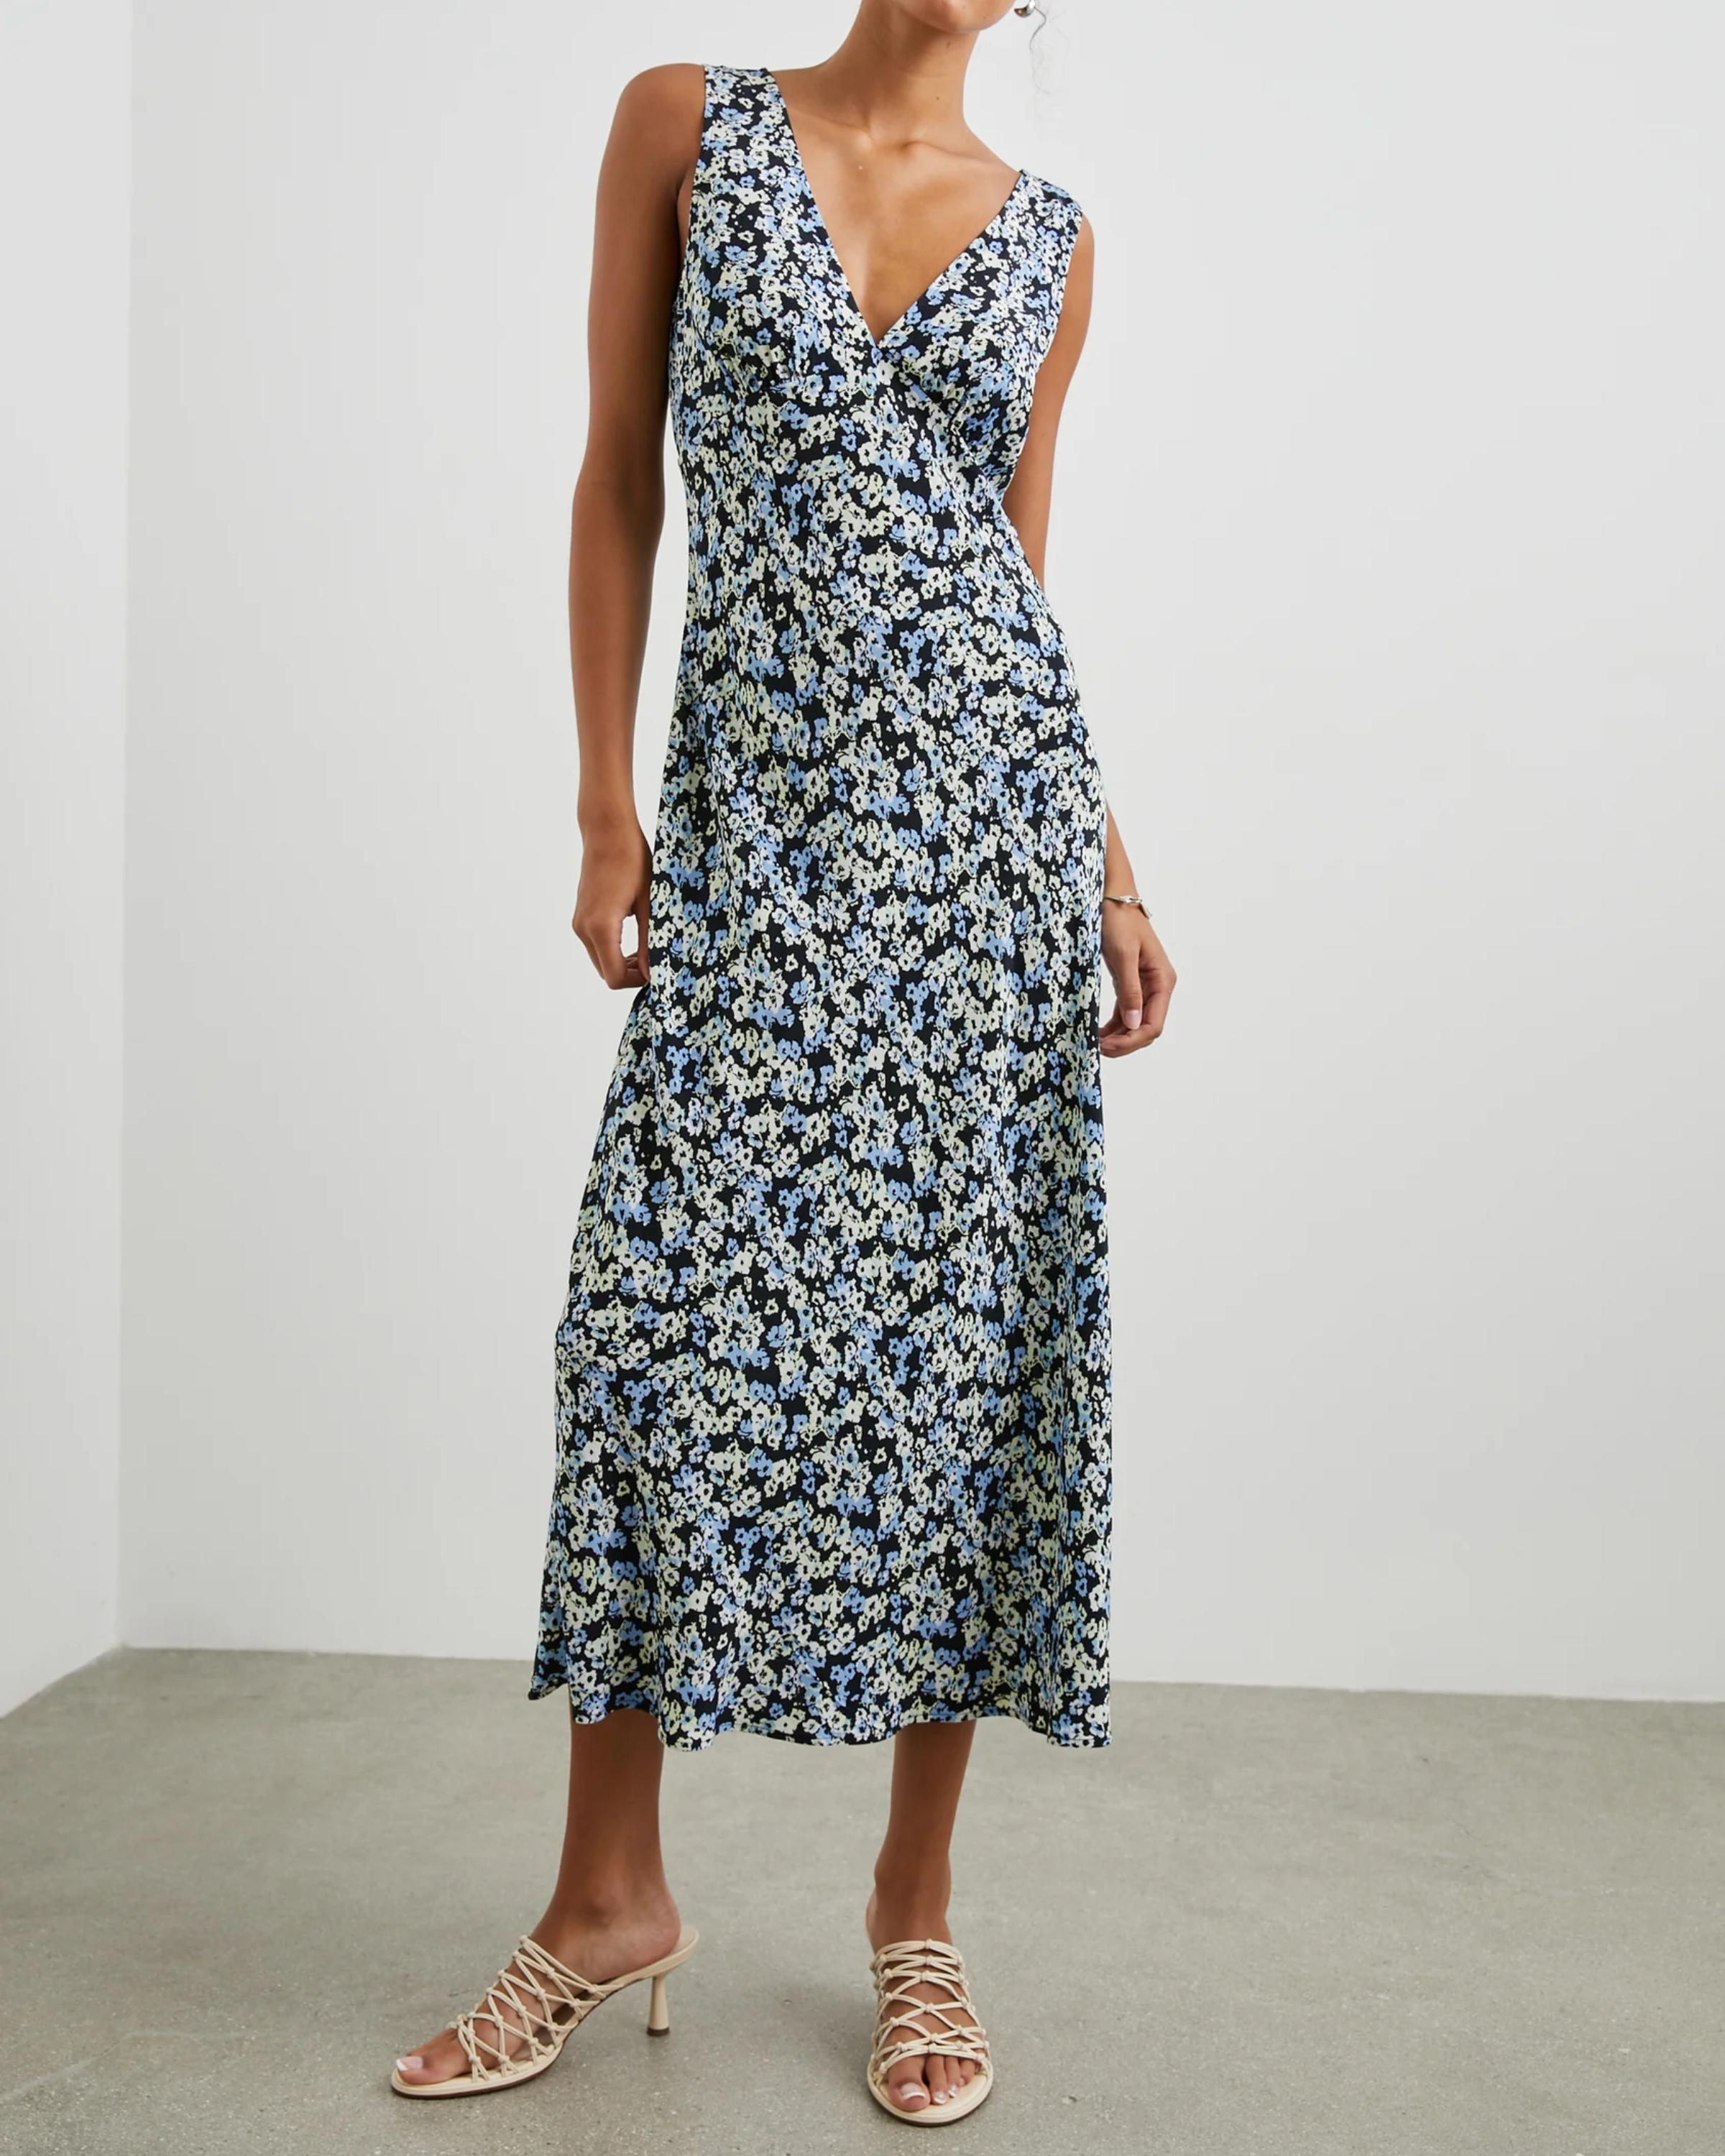 Rails Audrina Dress in Midnight Meadow Floral